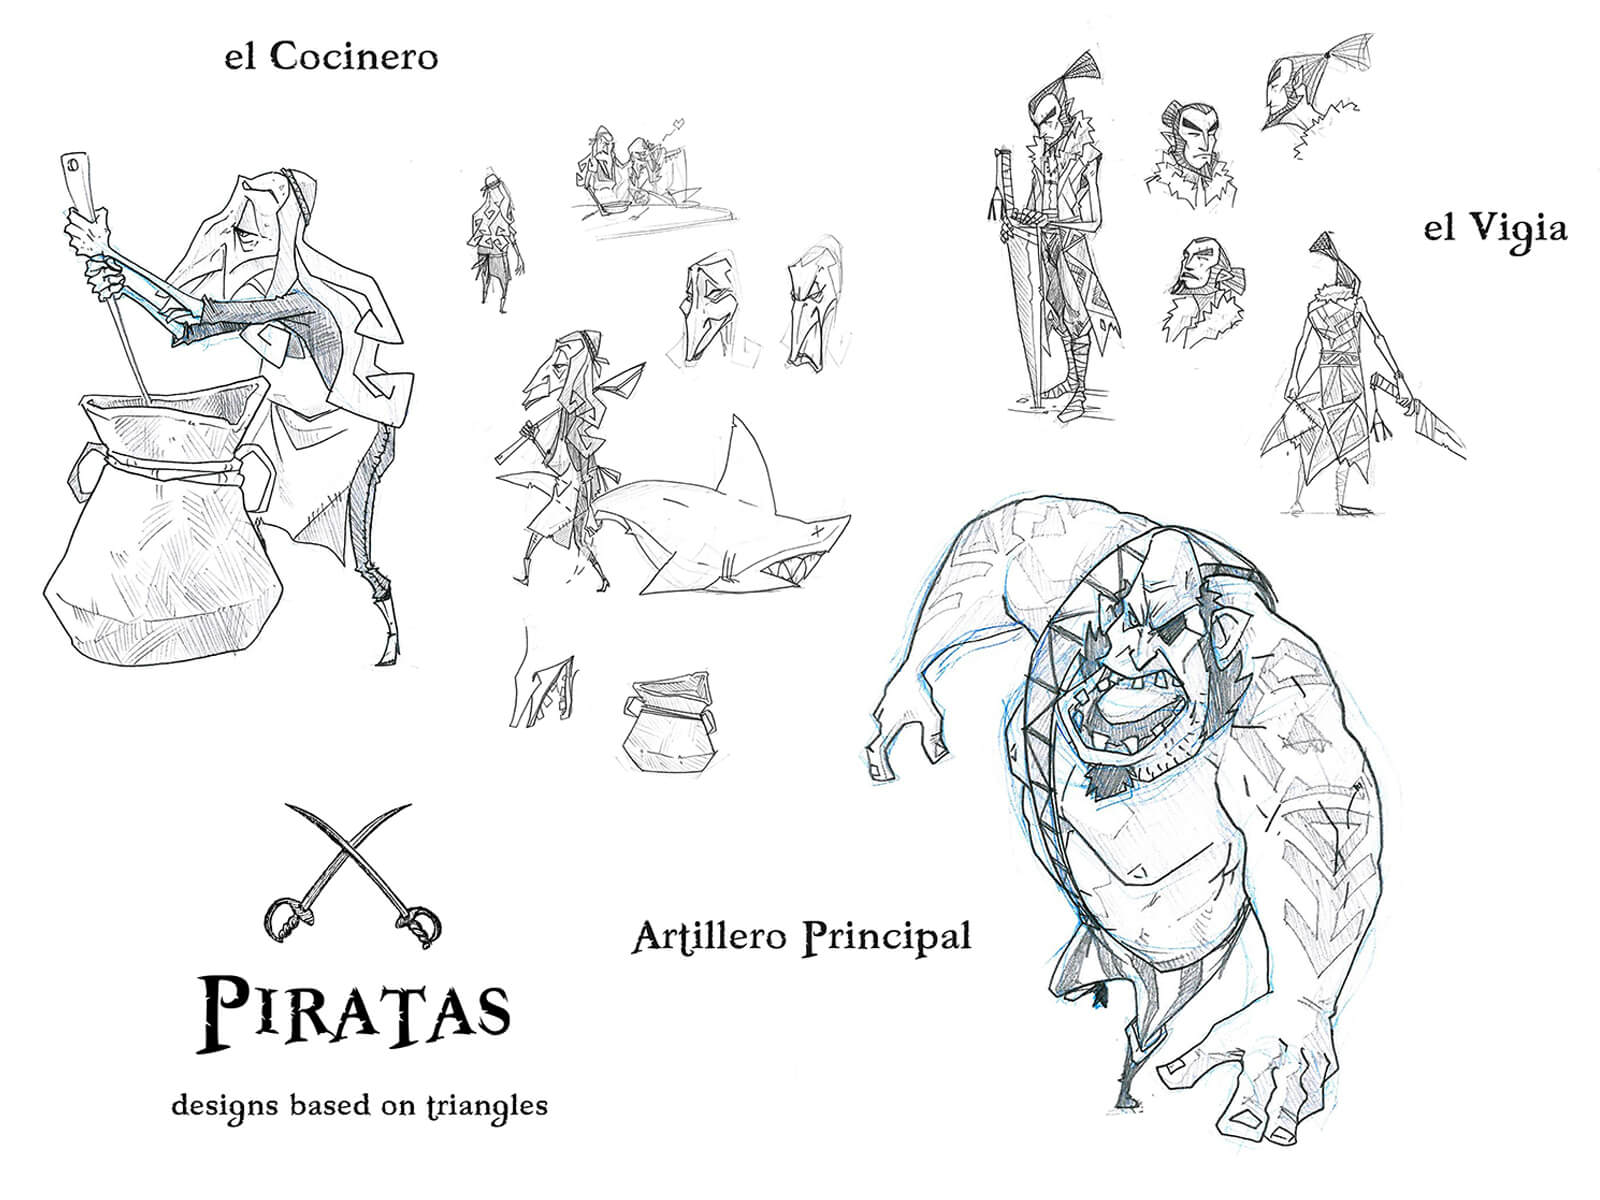 Black-and-white sketches of an old cook, a sword-wielding watchman, and a hulking pirate artilleryman.